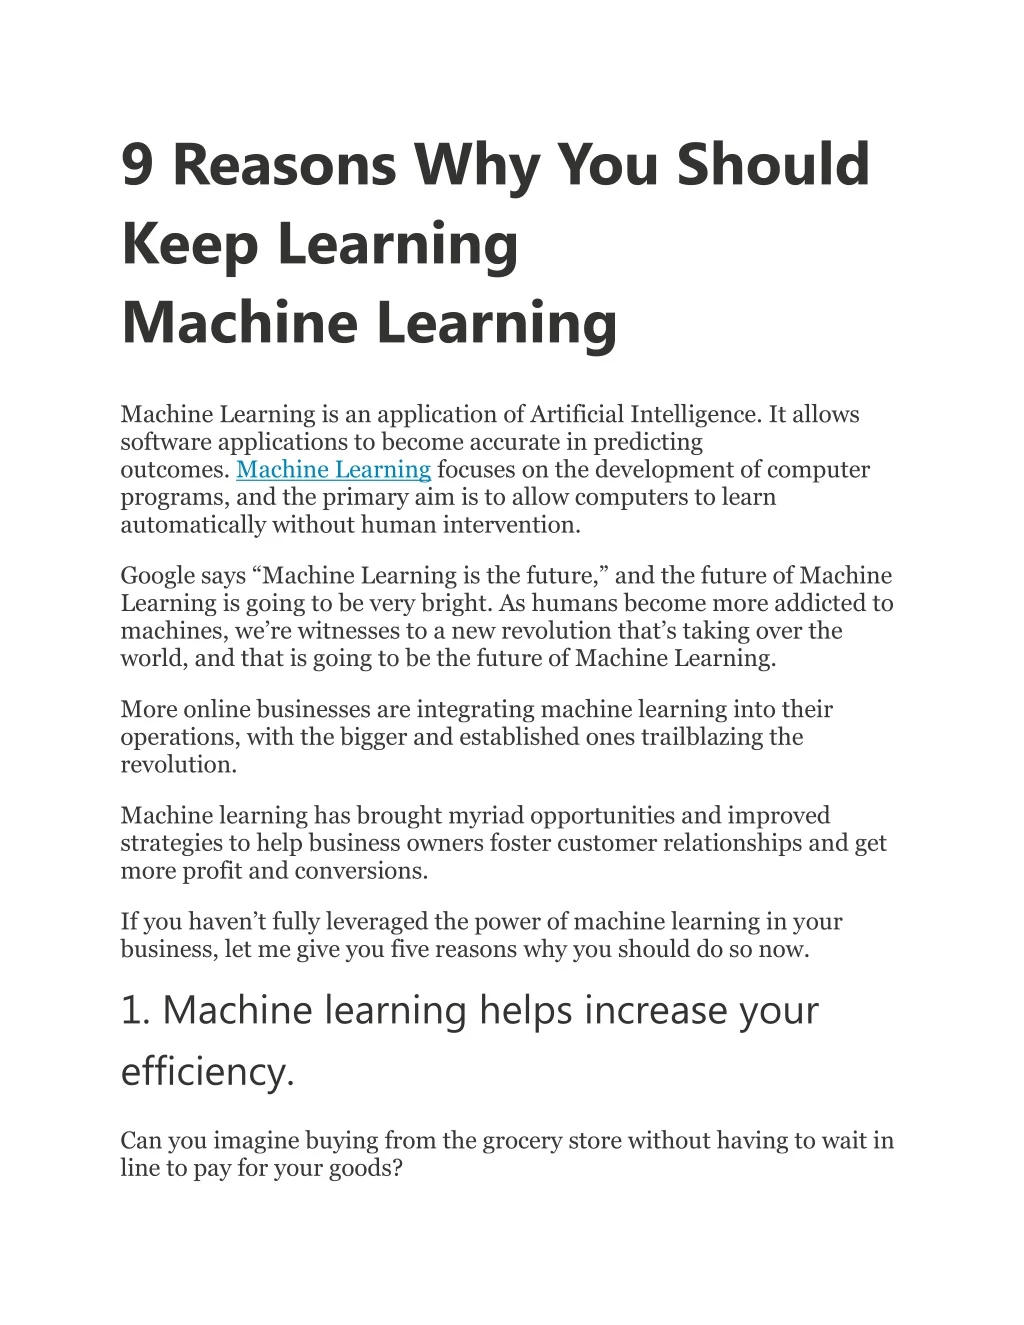 9 reasons why you should keep learning machine